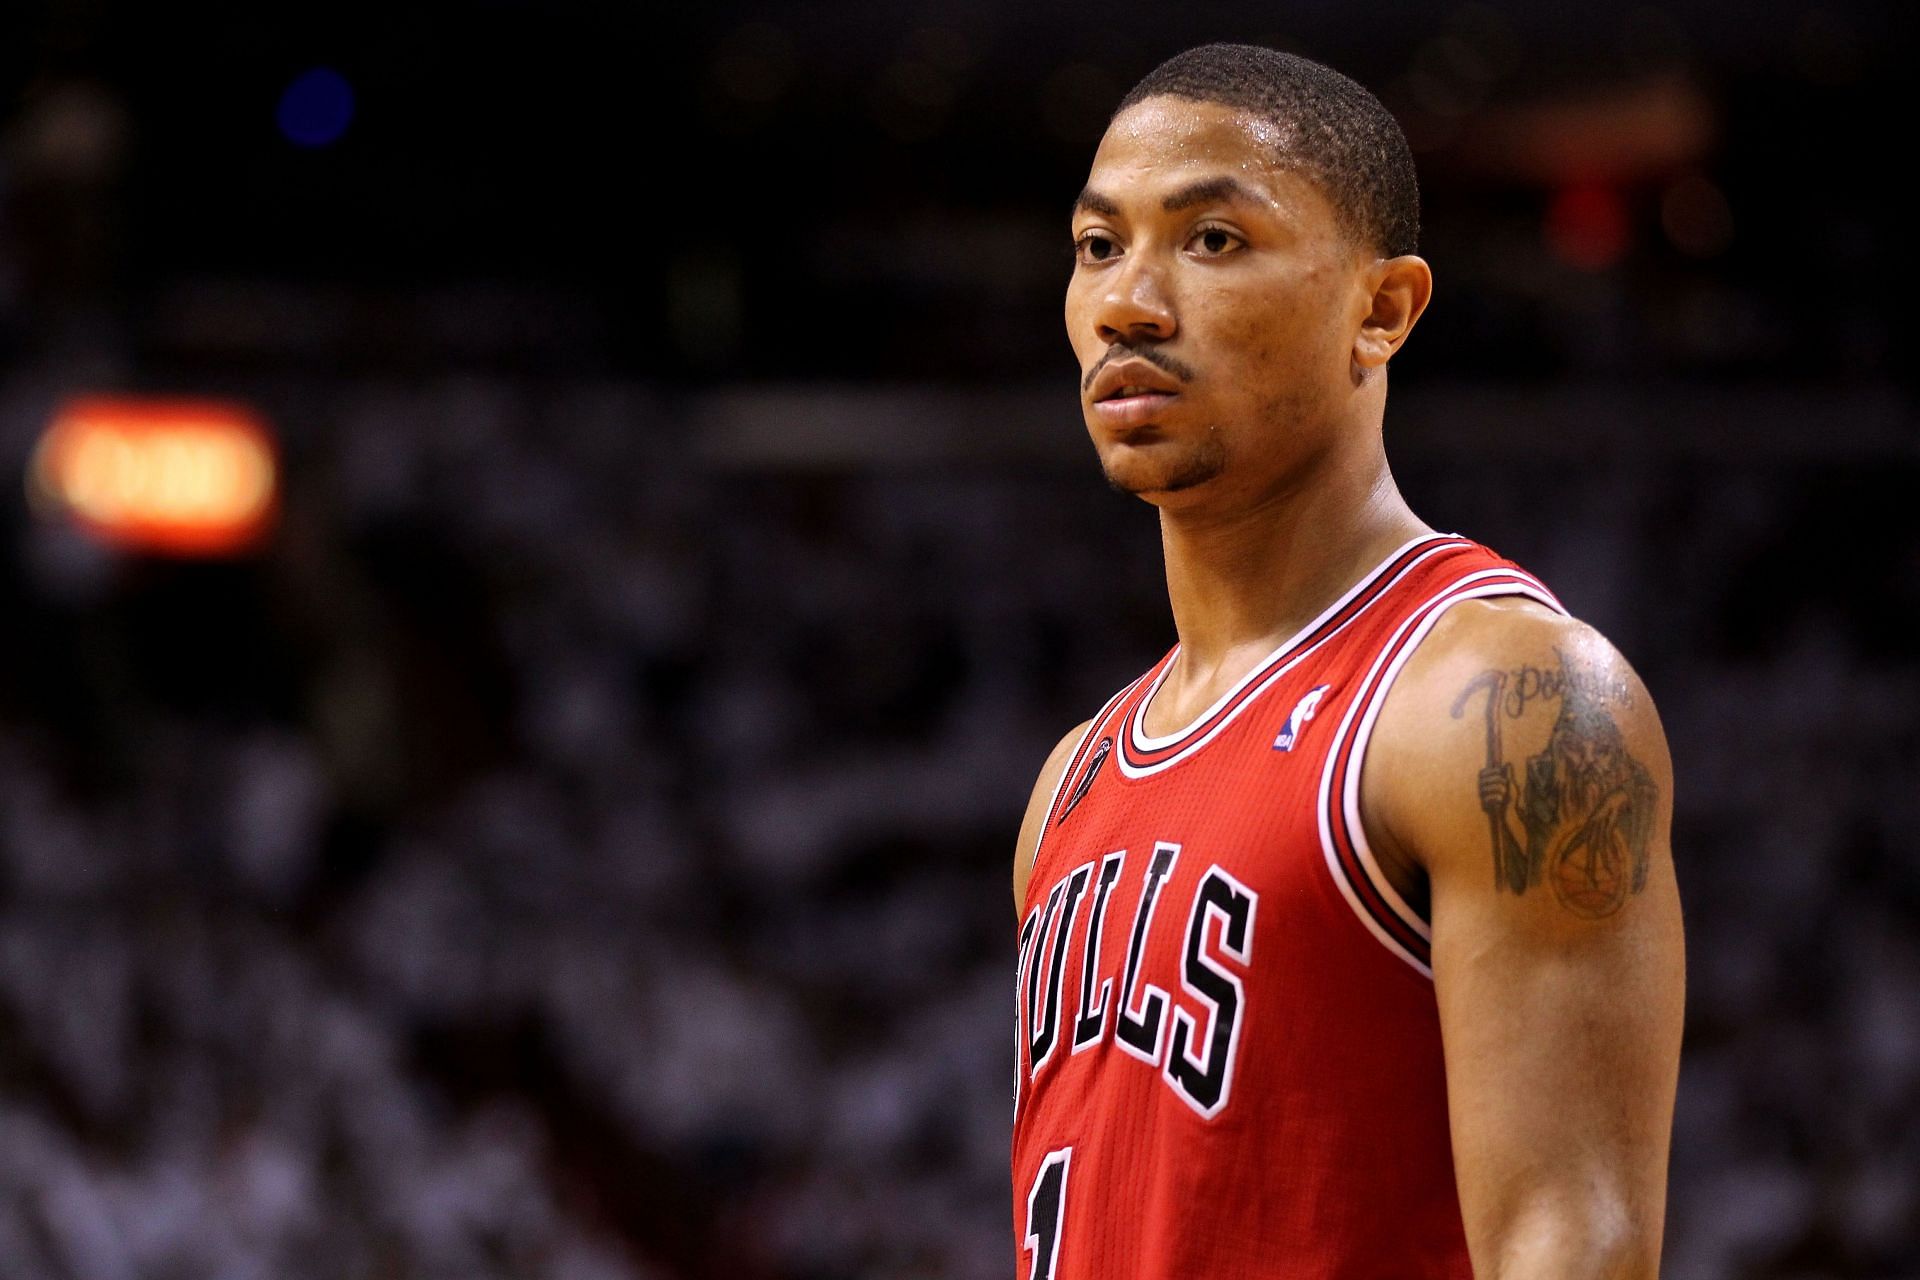 The Bulls were one of the most popular NBA teams with Derrick Rose (Image via Getty Images)